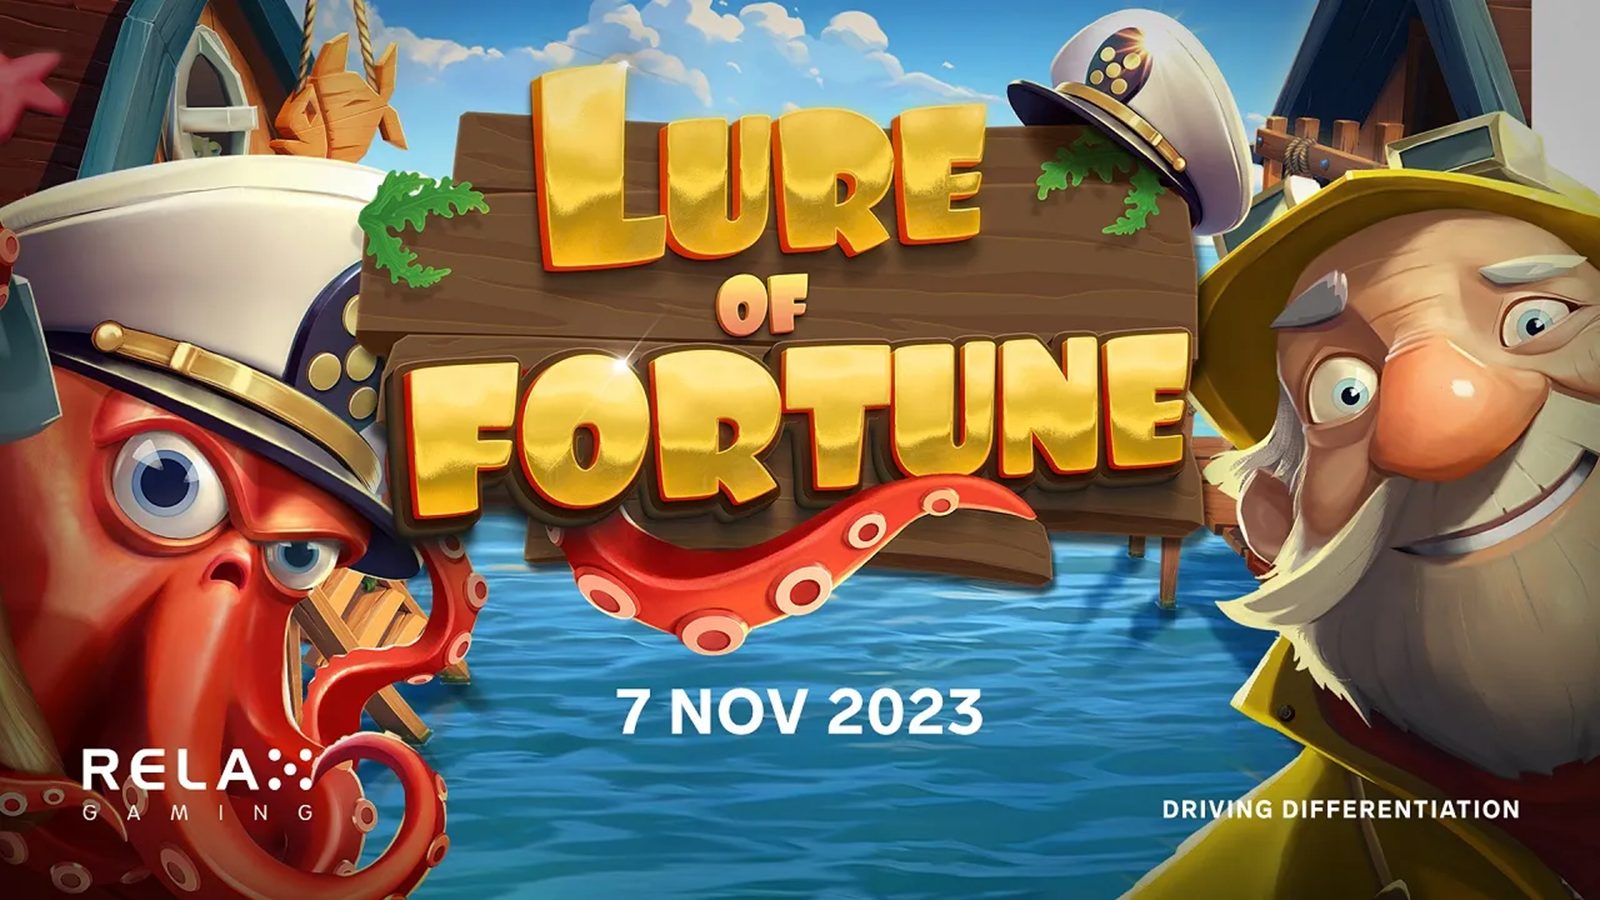 Relax Gaming Introduces Lure of Fortune